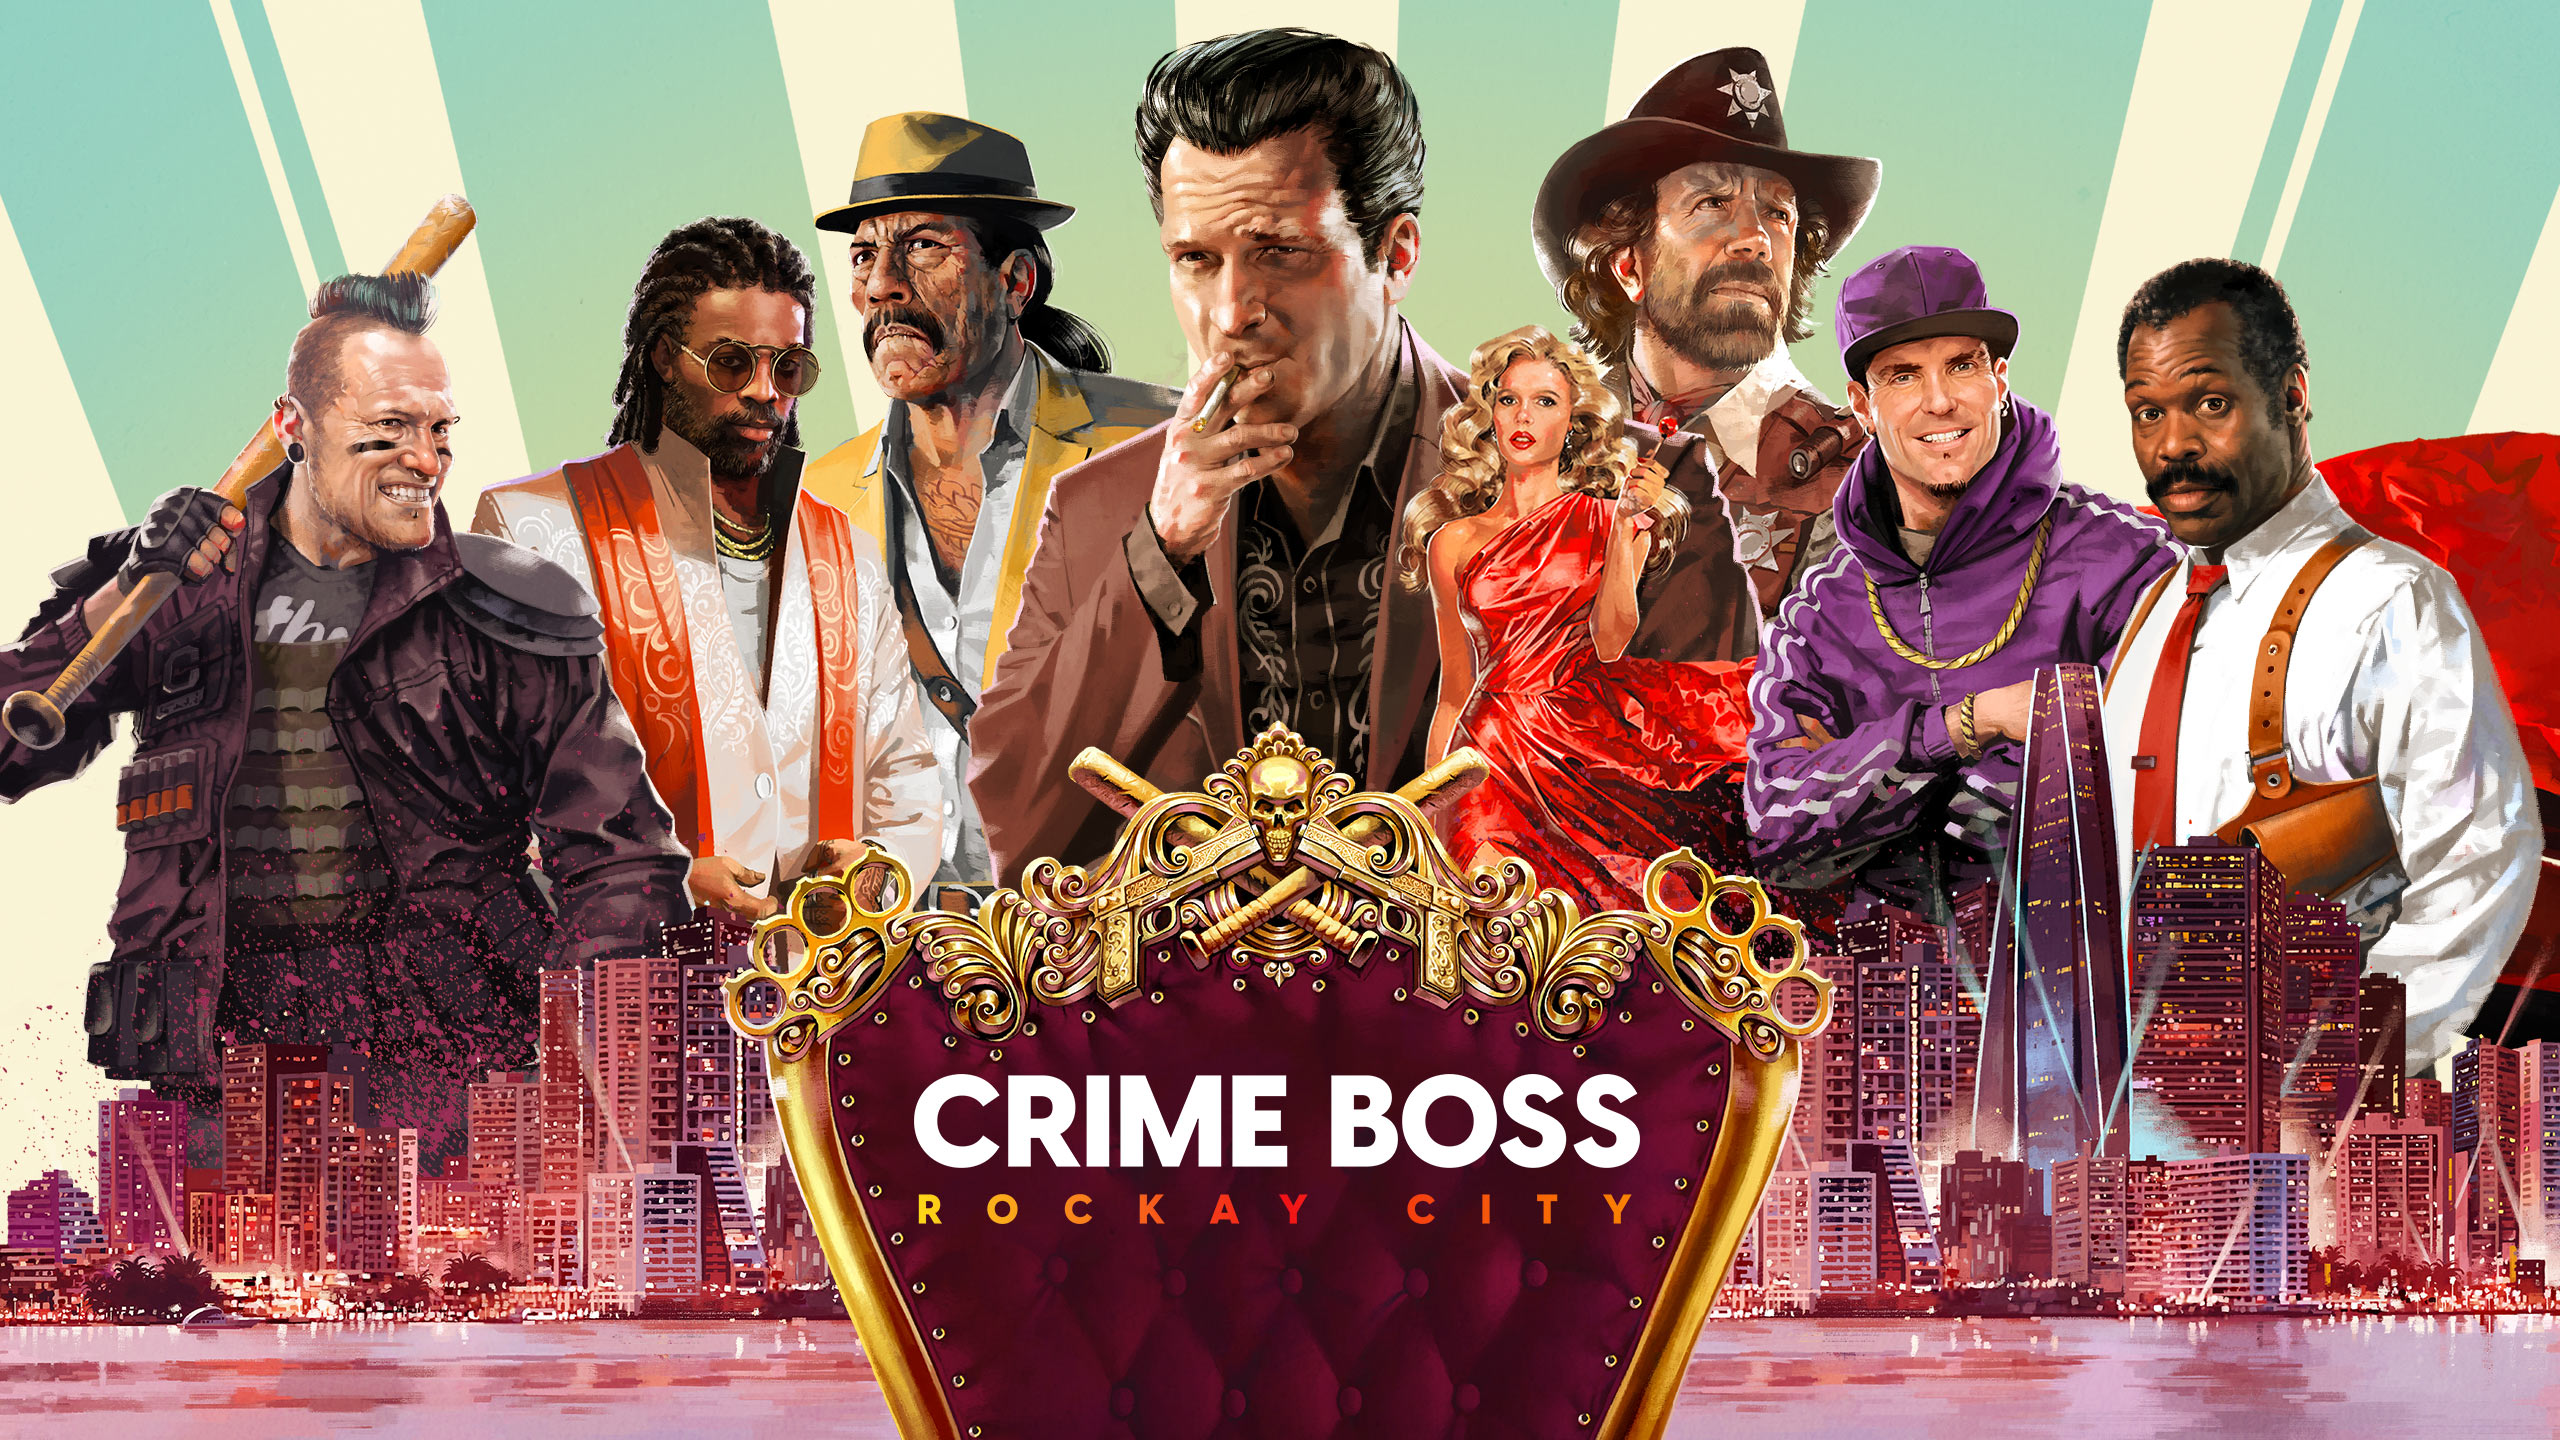 Following Kingdom Hearts: Crime Boss: Rockay City will be released on Steam on the 18th of June